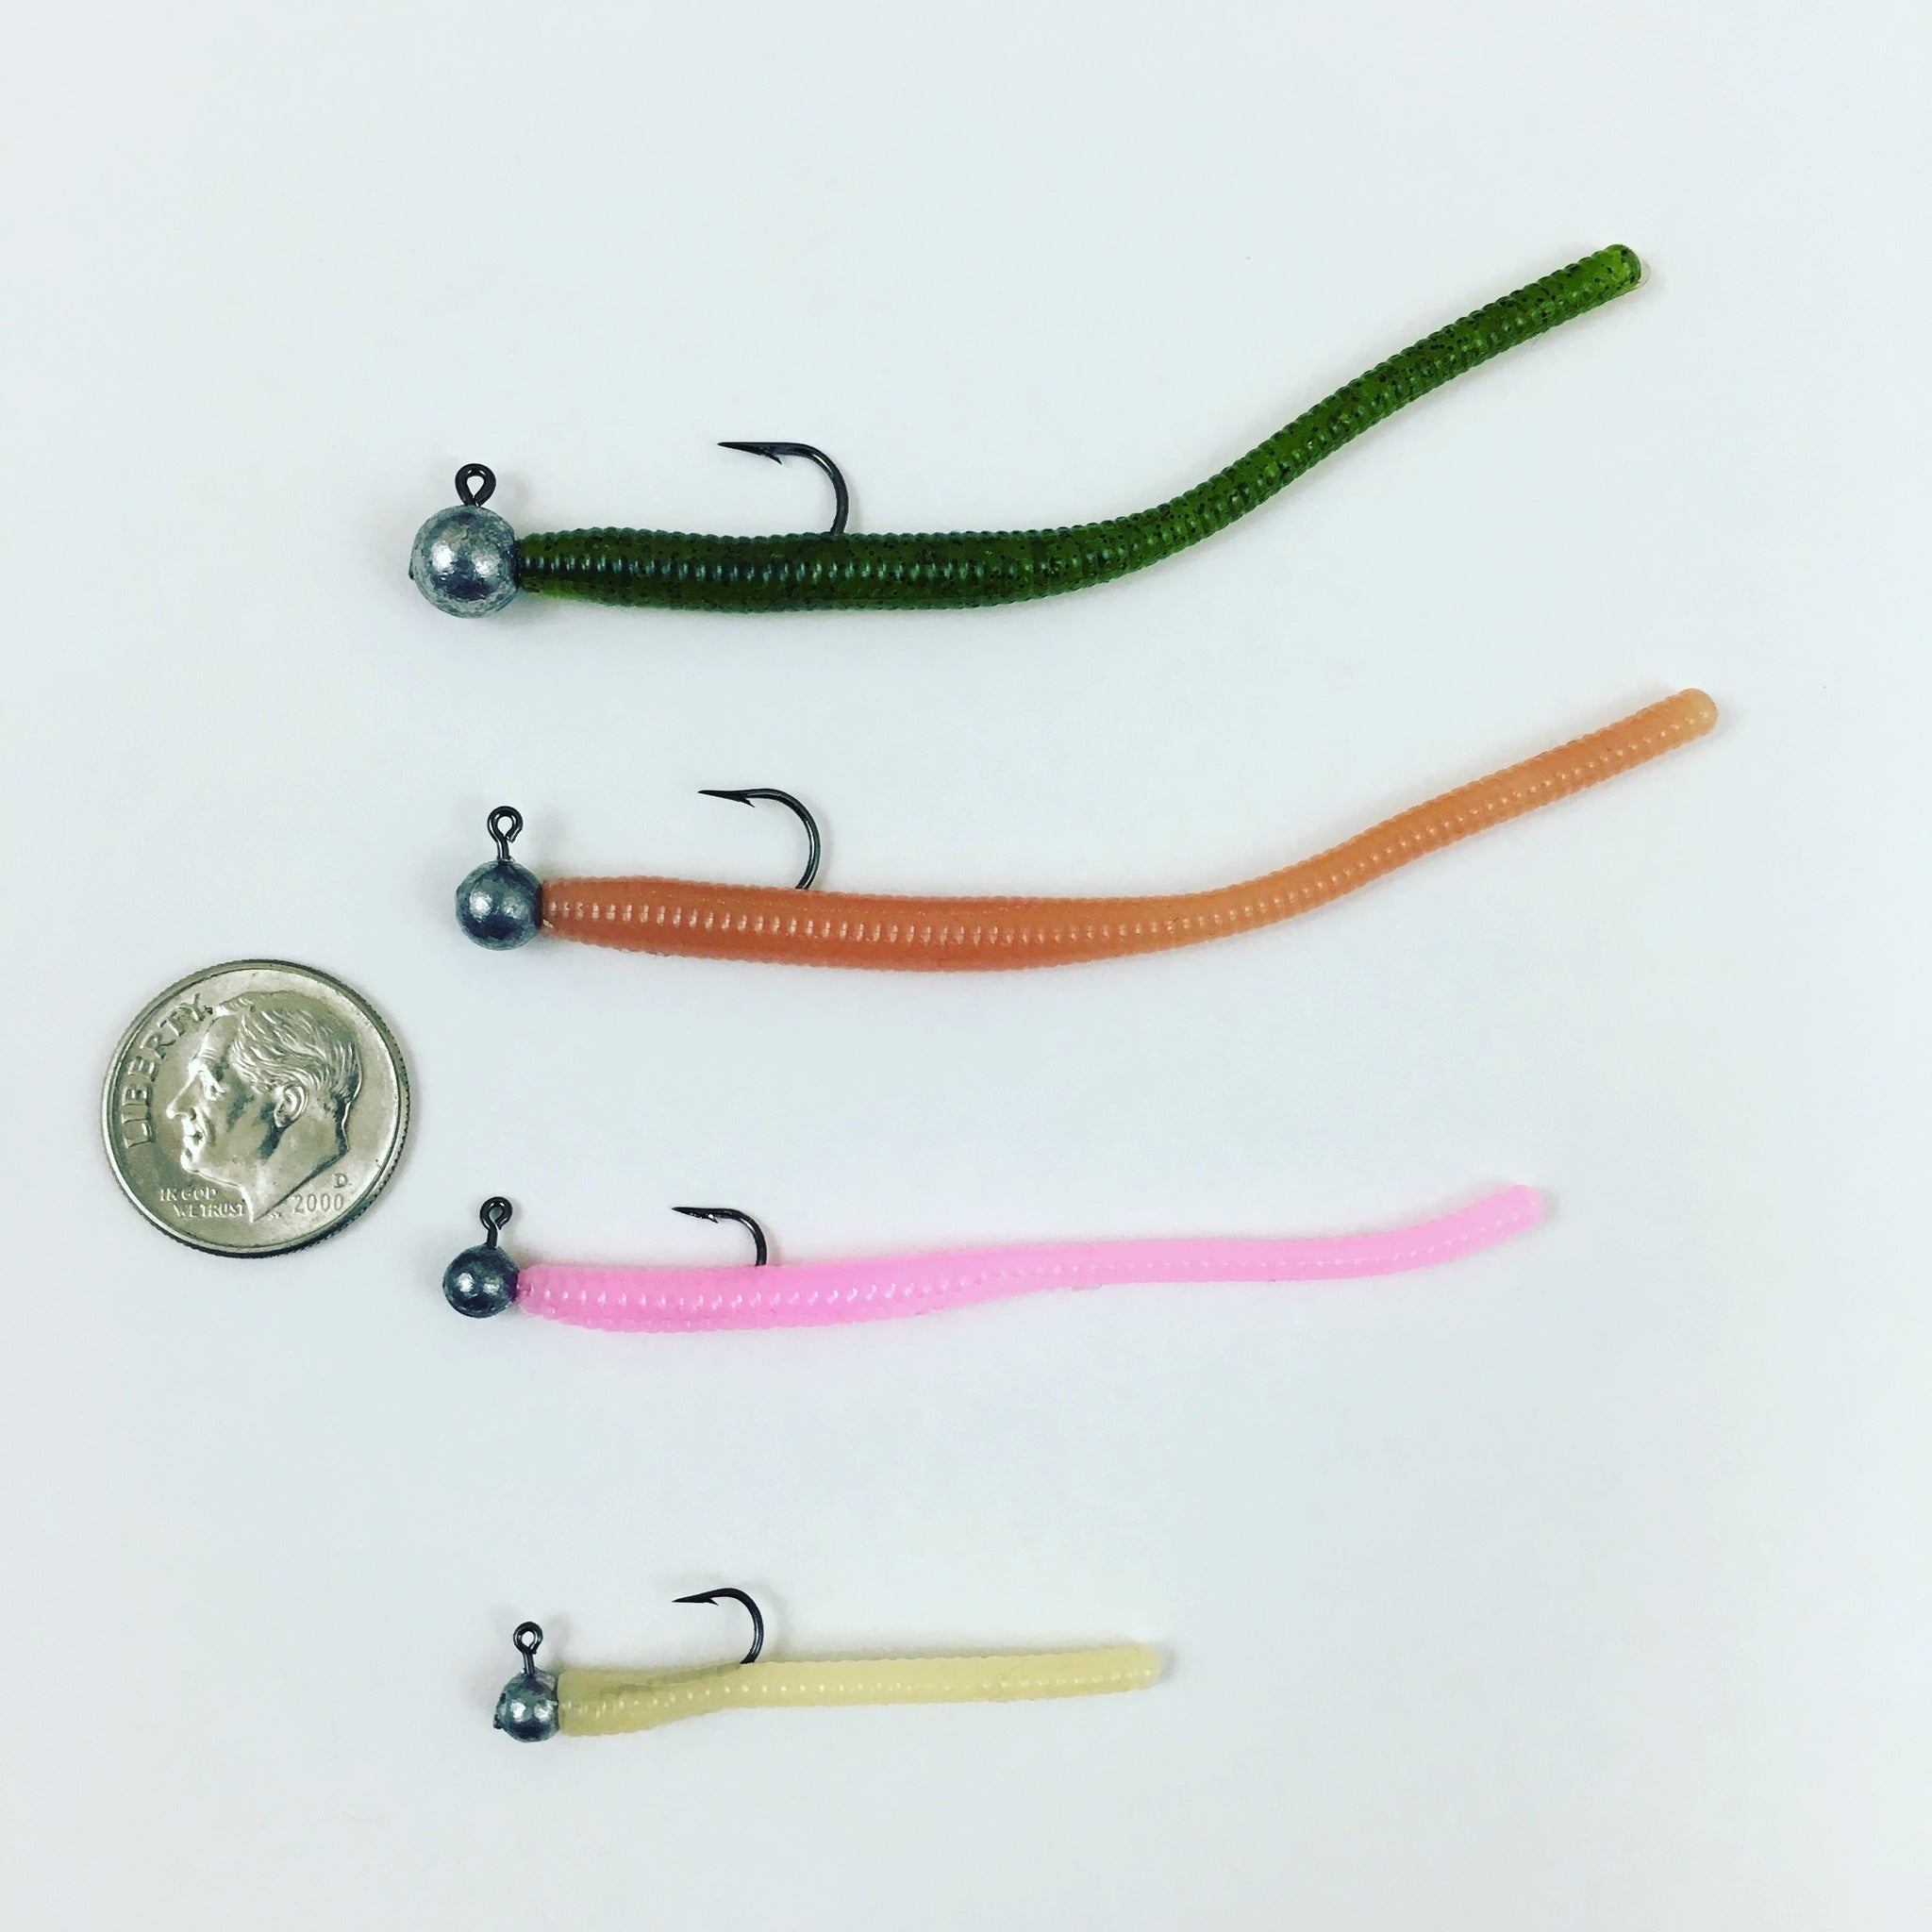 Trout Worms: Junebug